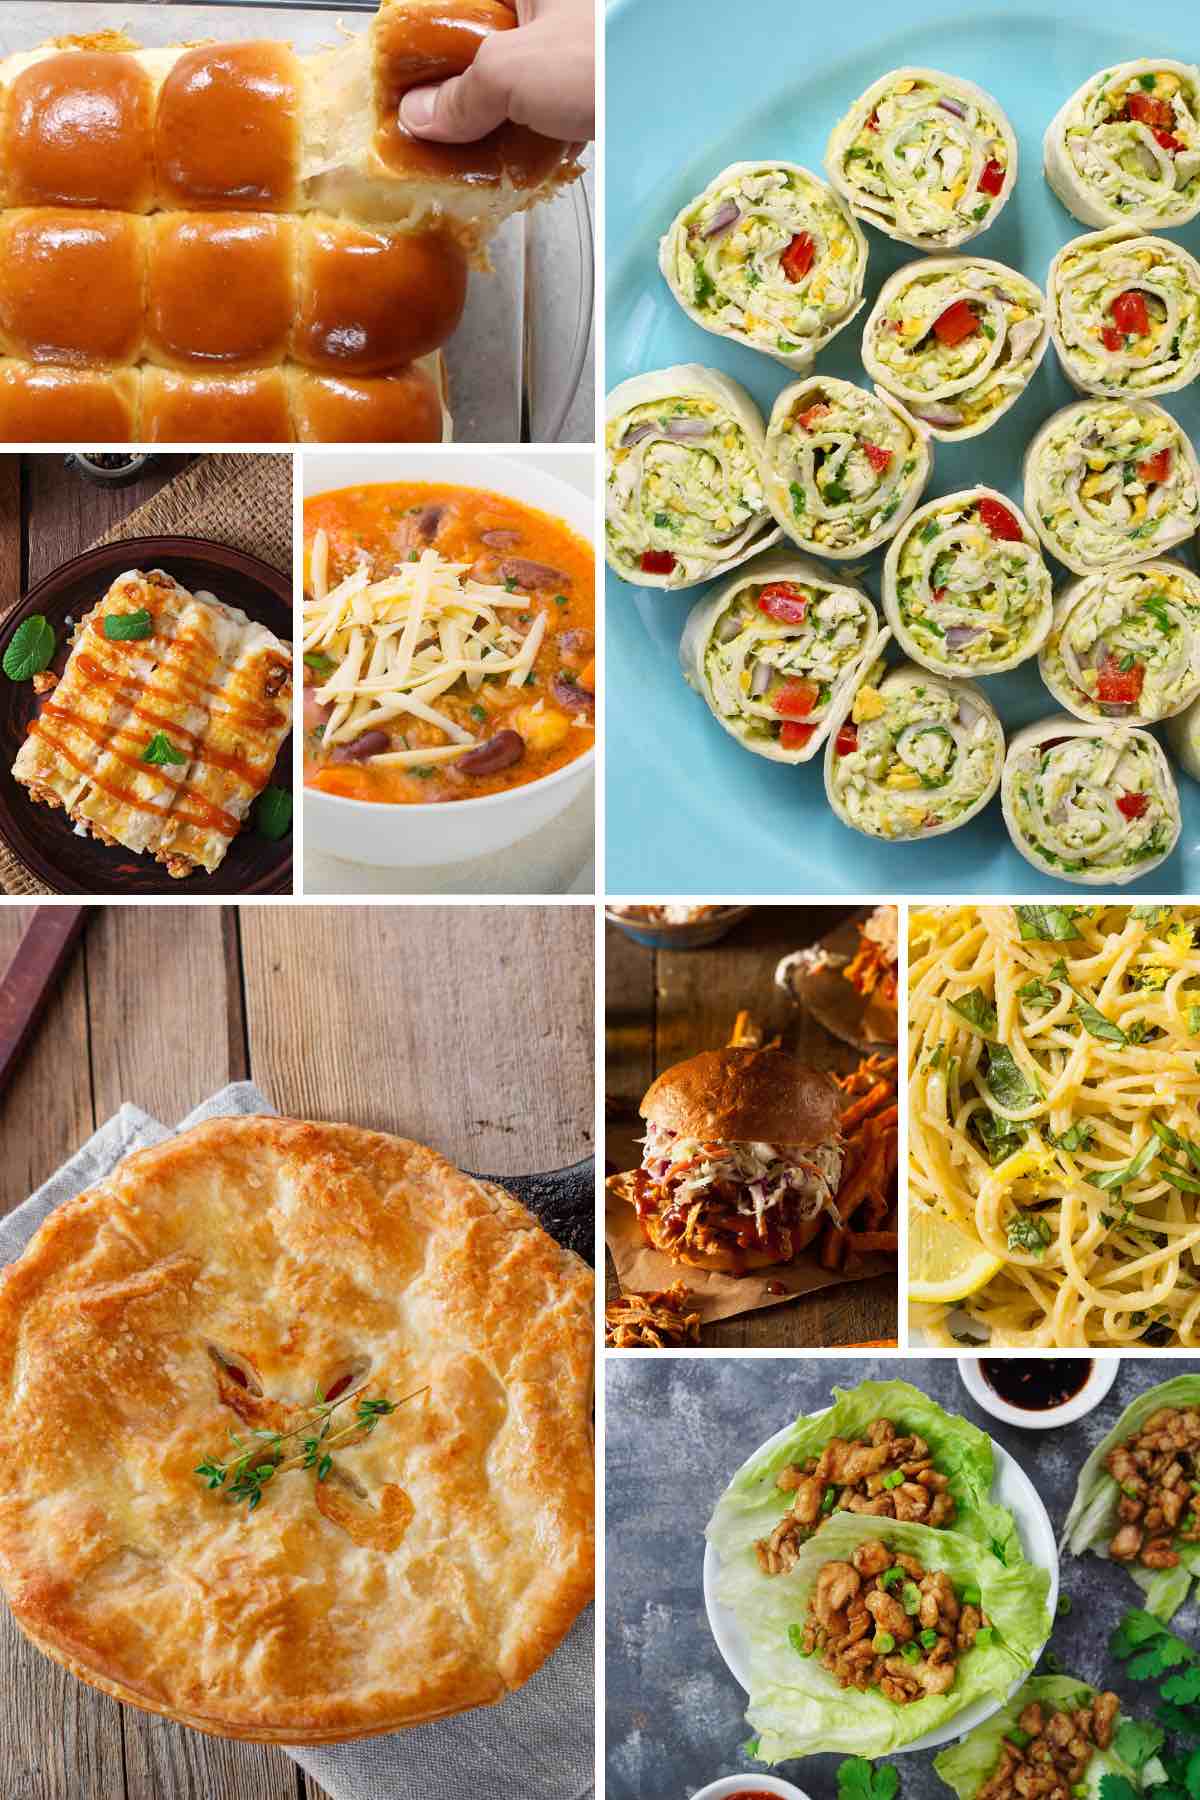 Canned chicken recipes such as pot pie, sliders, roll-ups and lettuce wraps.